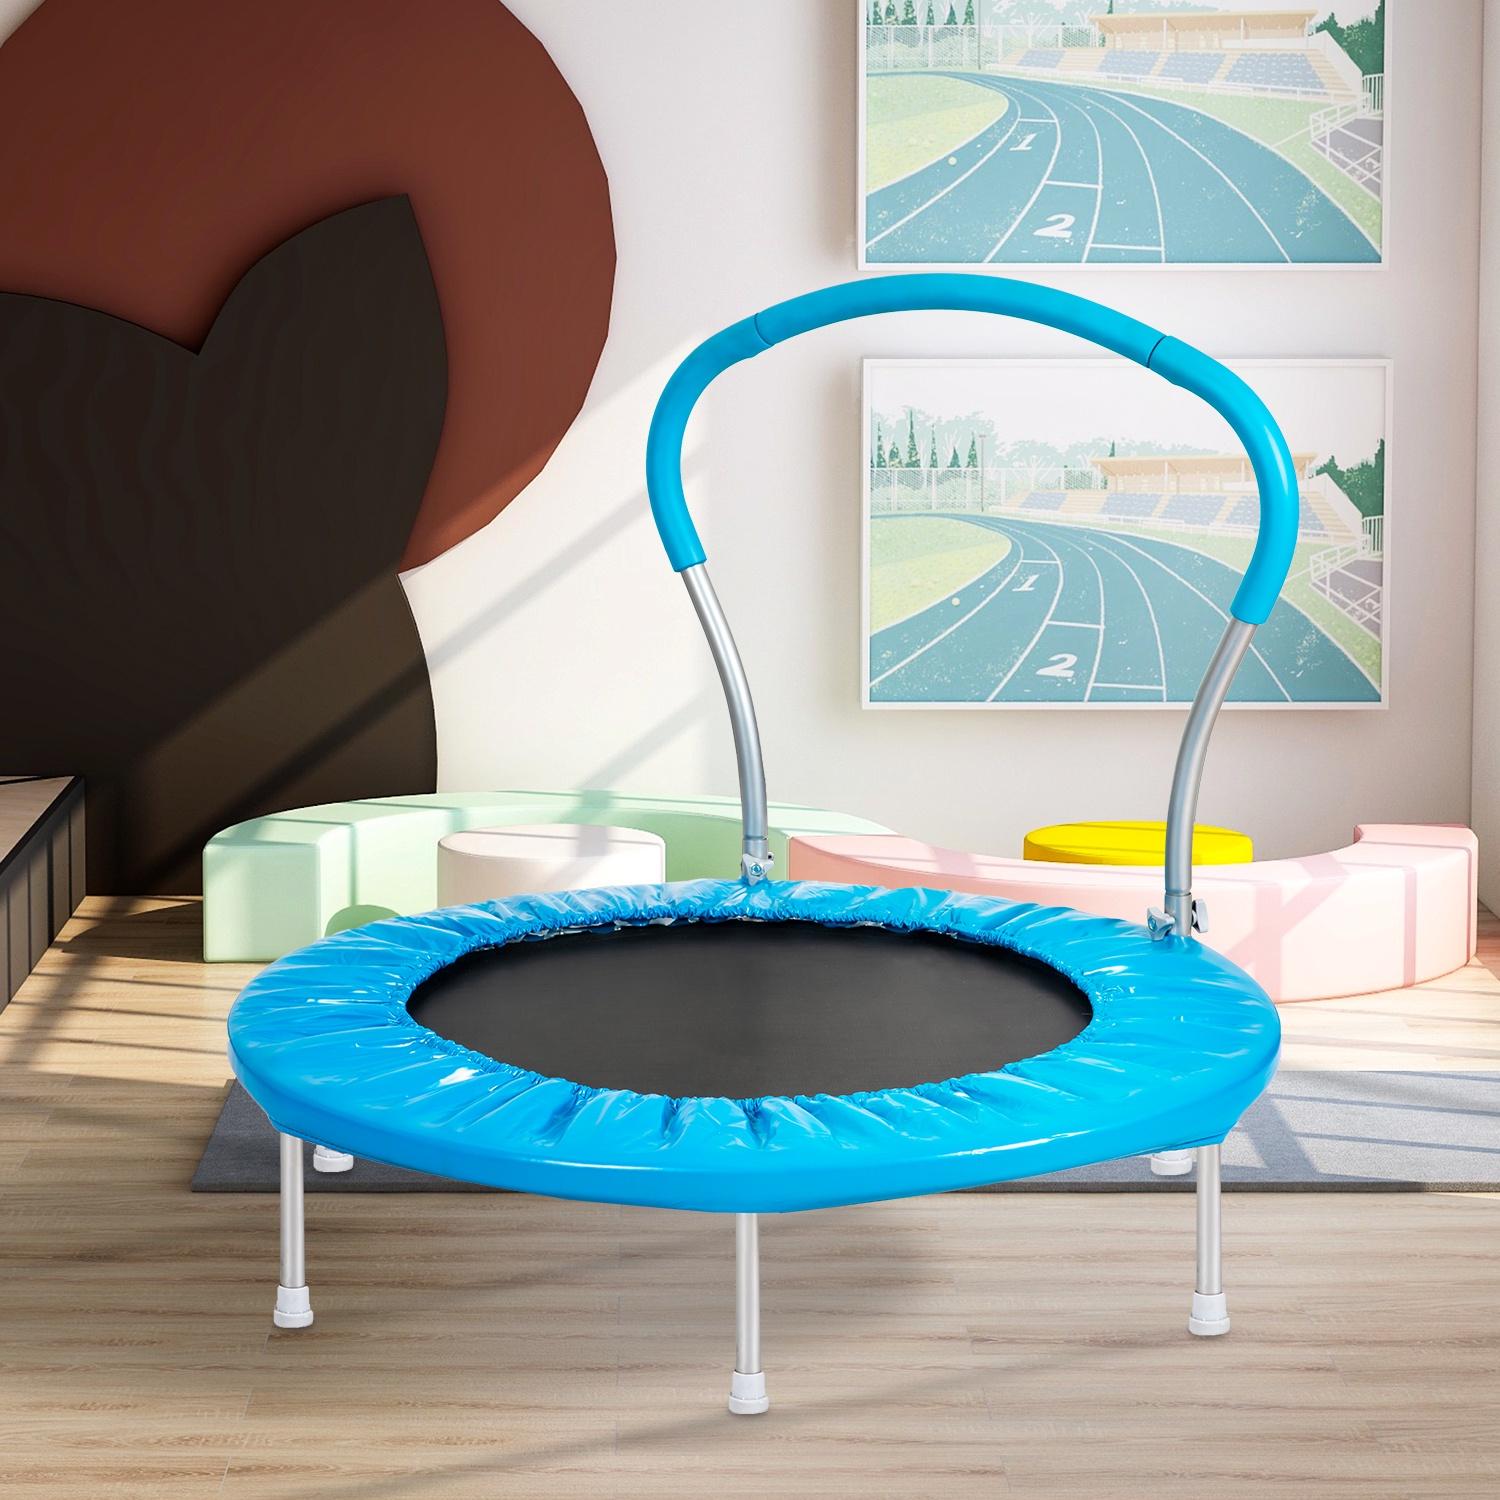 Small Trampoline for Kids Toddler, 36'' Mini Trampoline with Balance Handle, Outdoor Indoor Rebounder Round Trampoline as Gift for Boy Girl, Blue - image 2 of 9